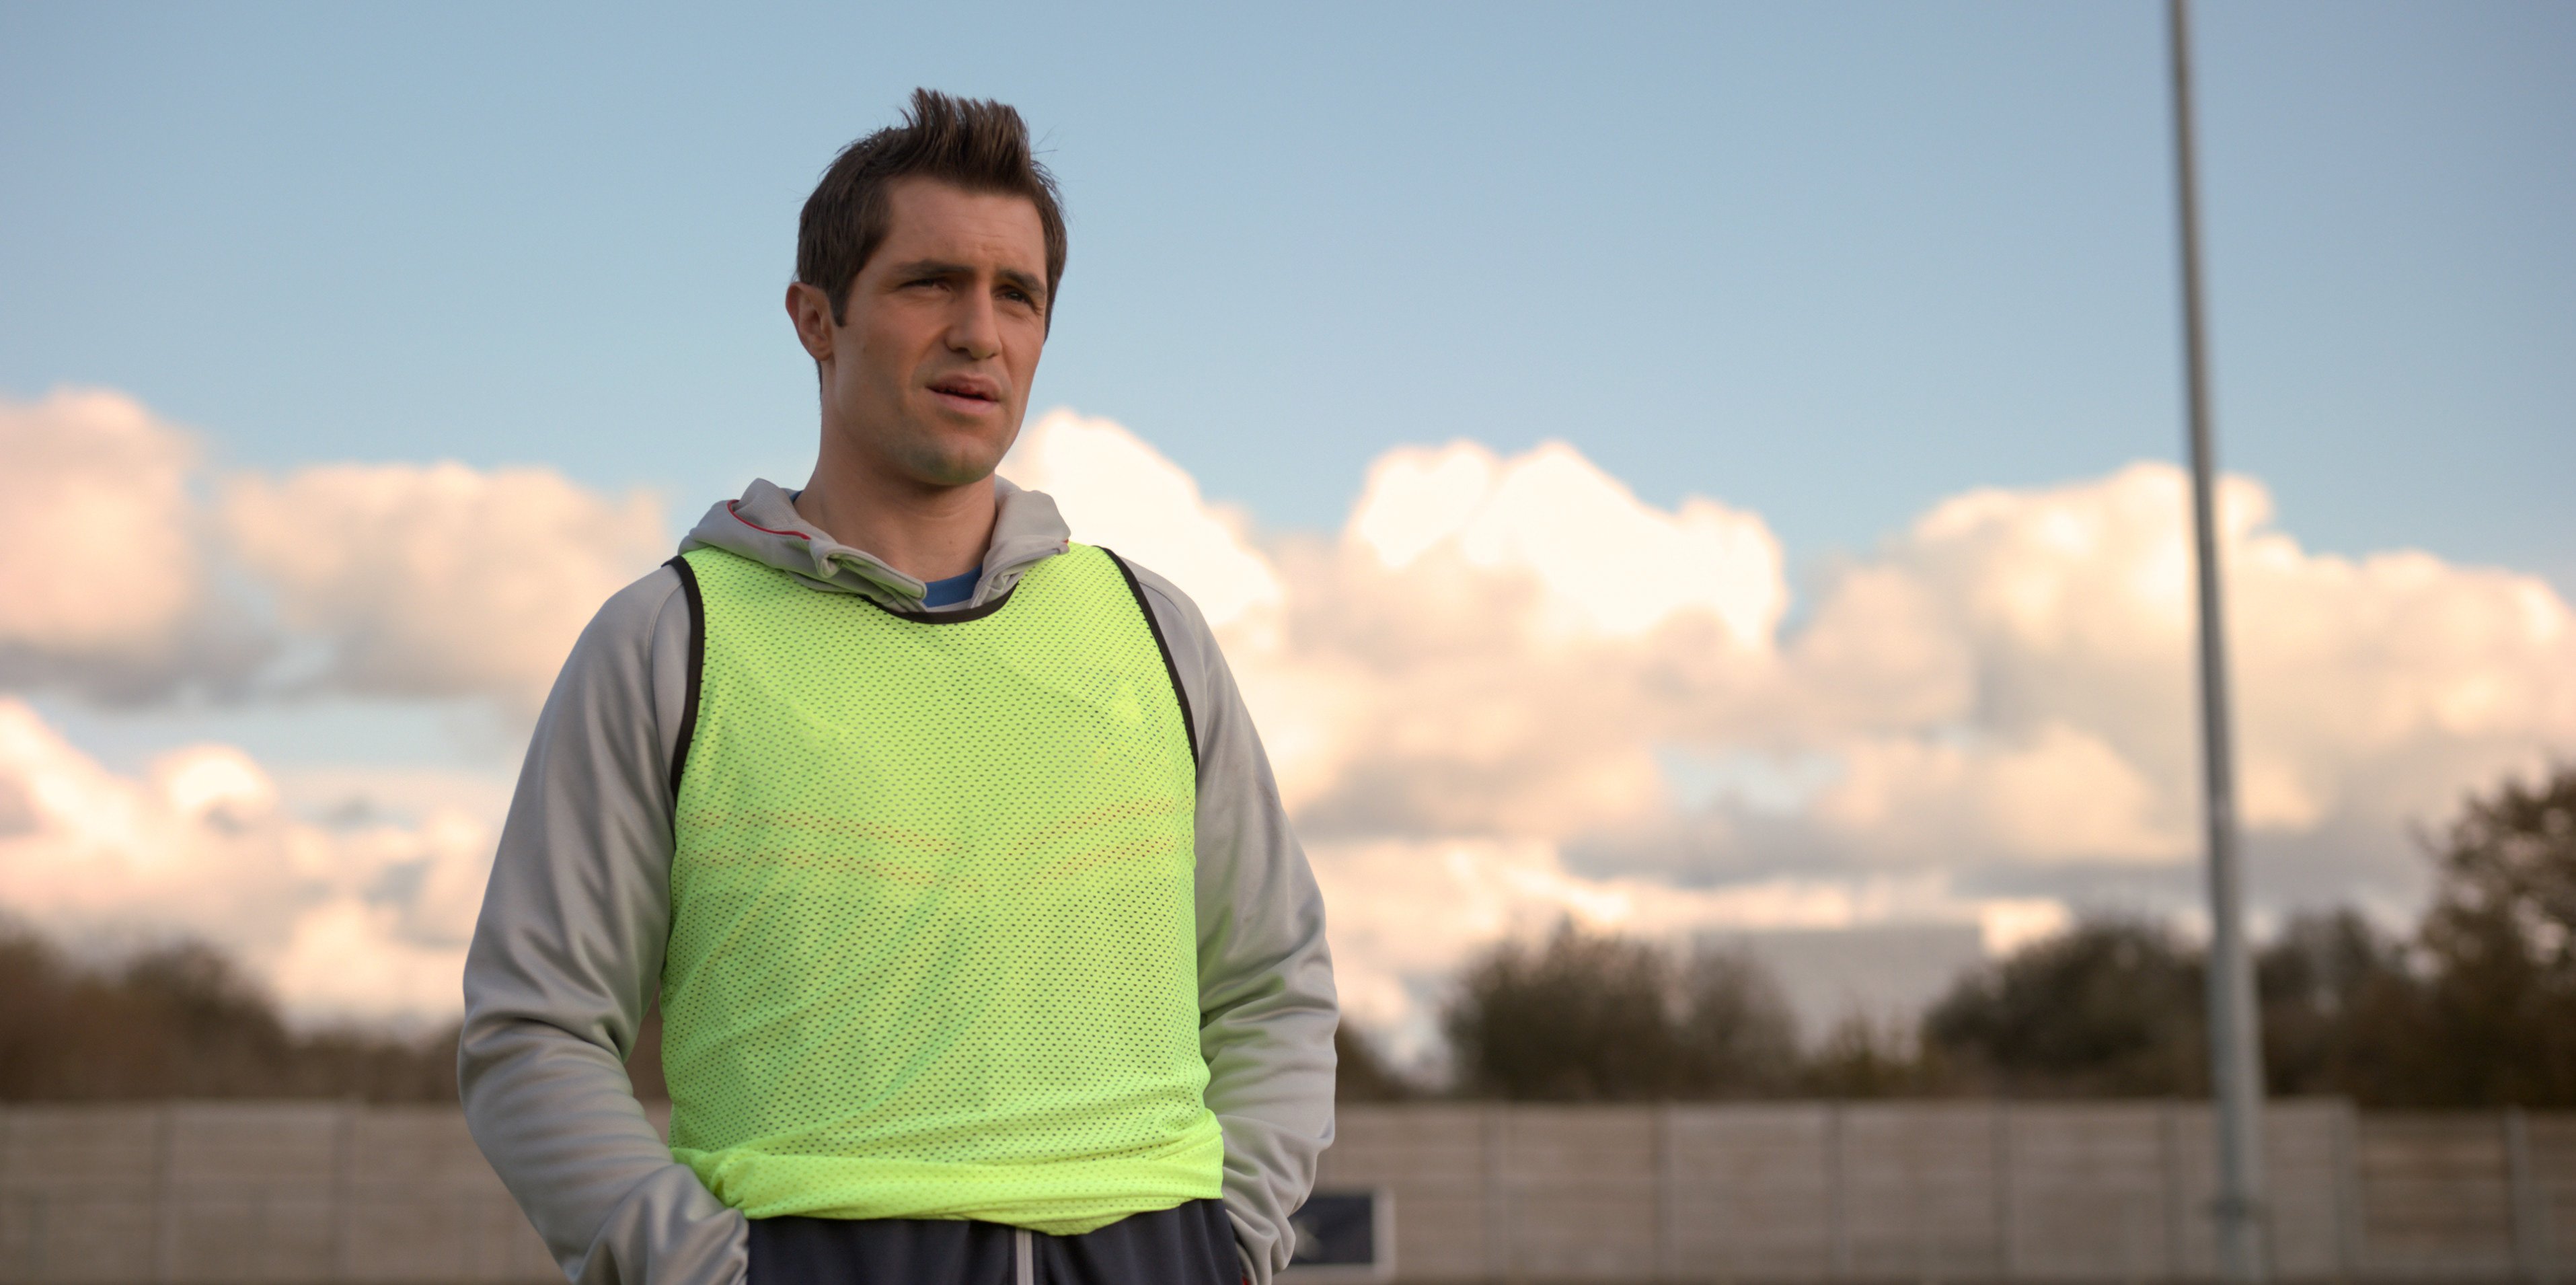 Phil Dunster wearing a yellow vest under a gray sweatshirt as Jamie Tartt on 'Ted Lasso'